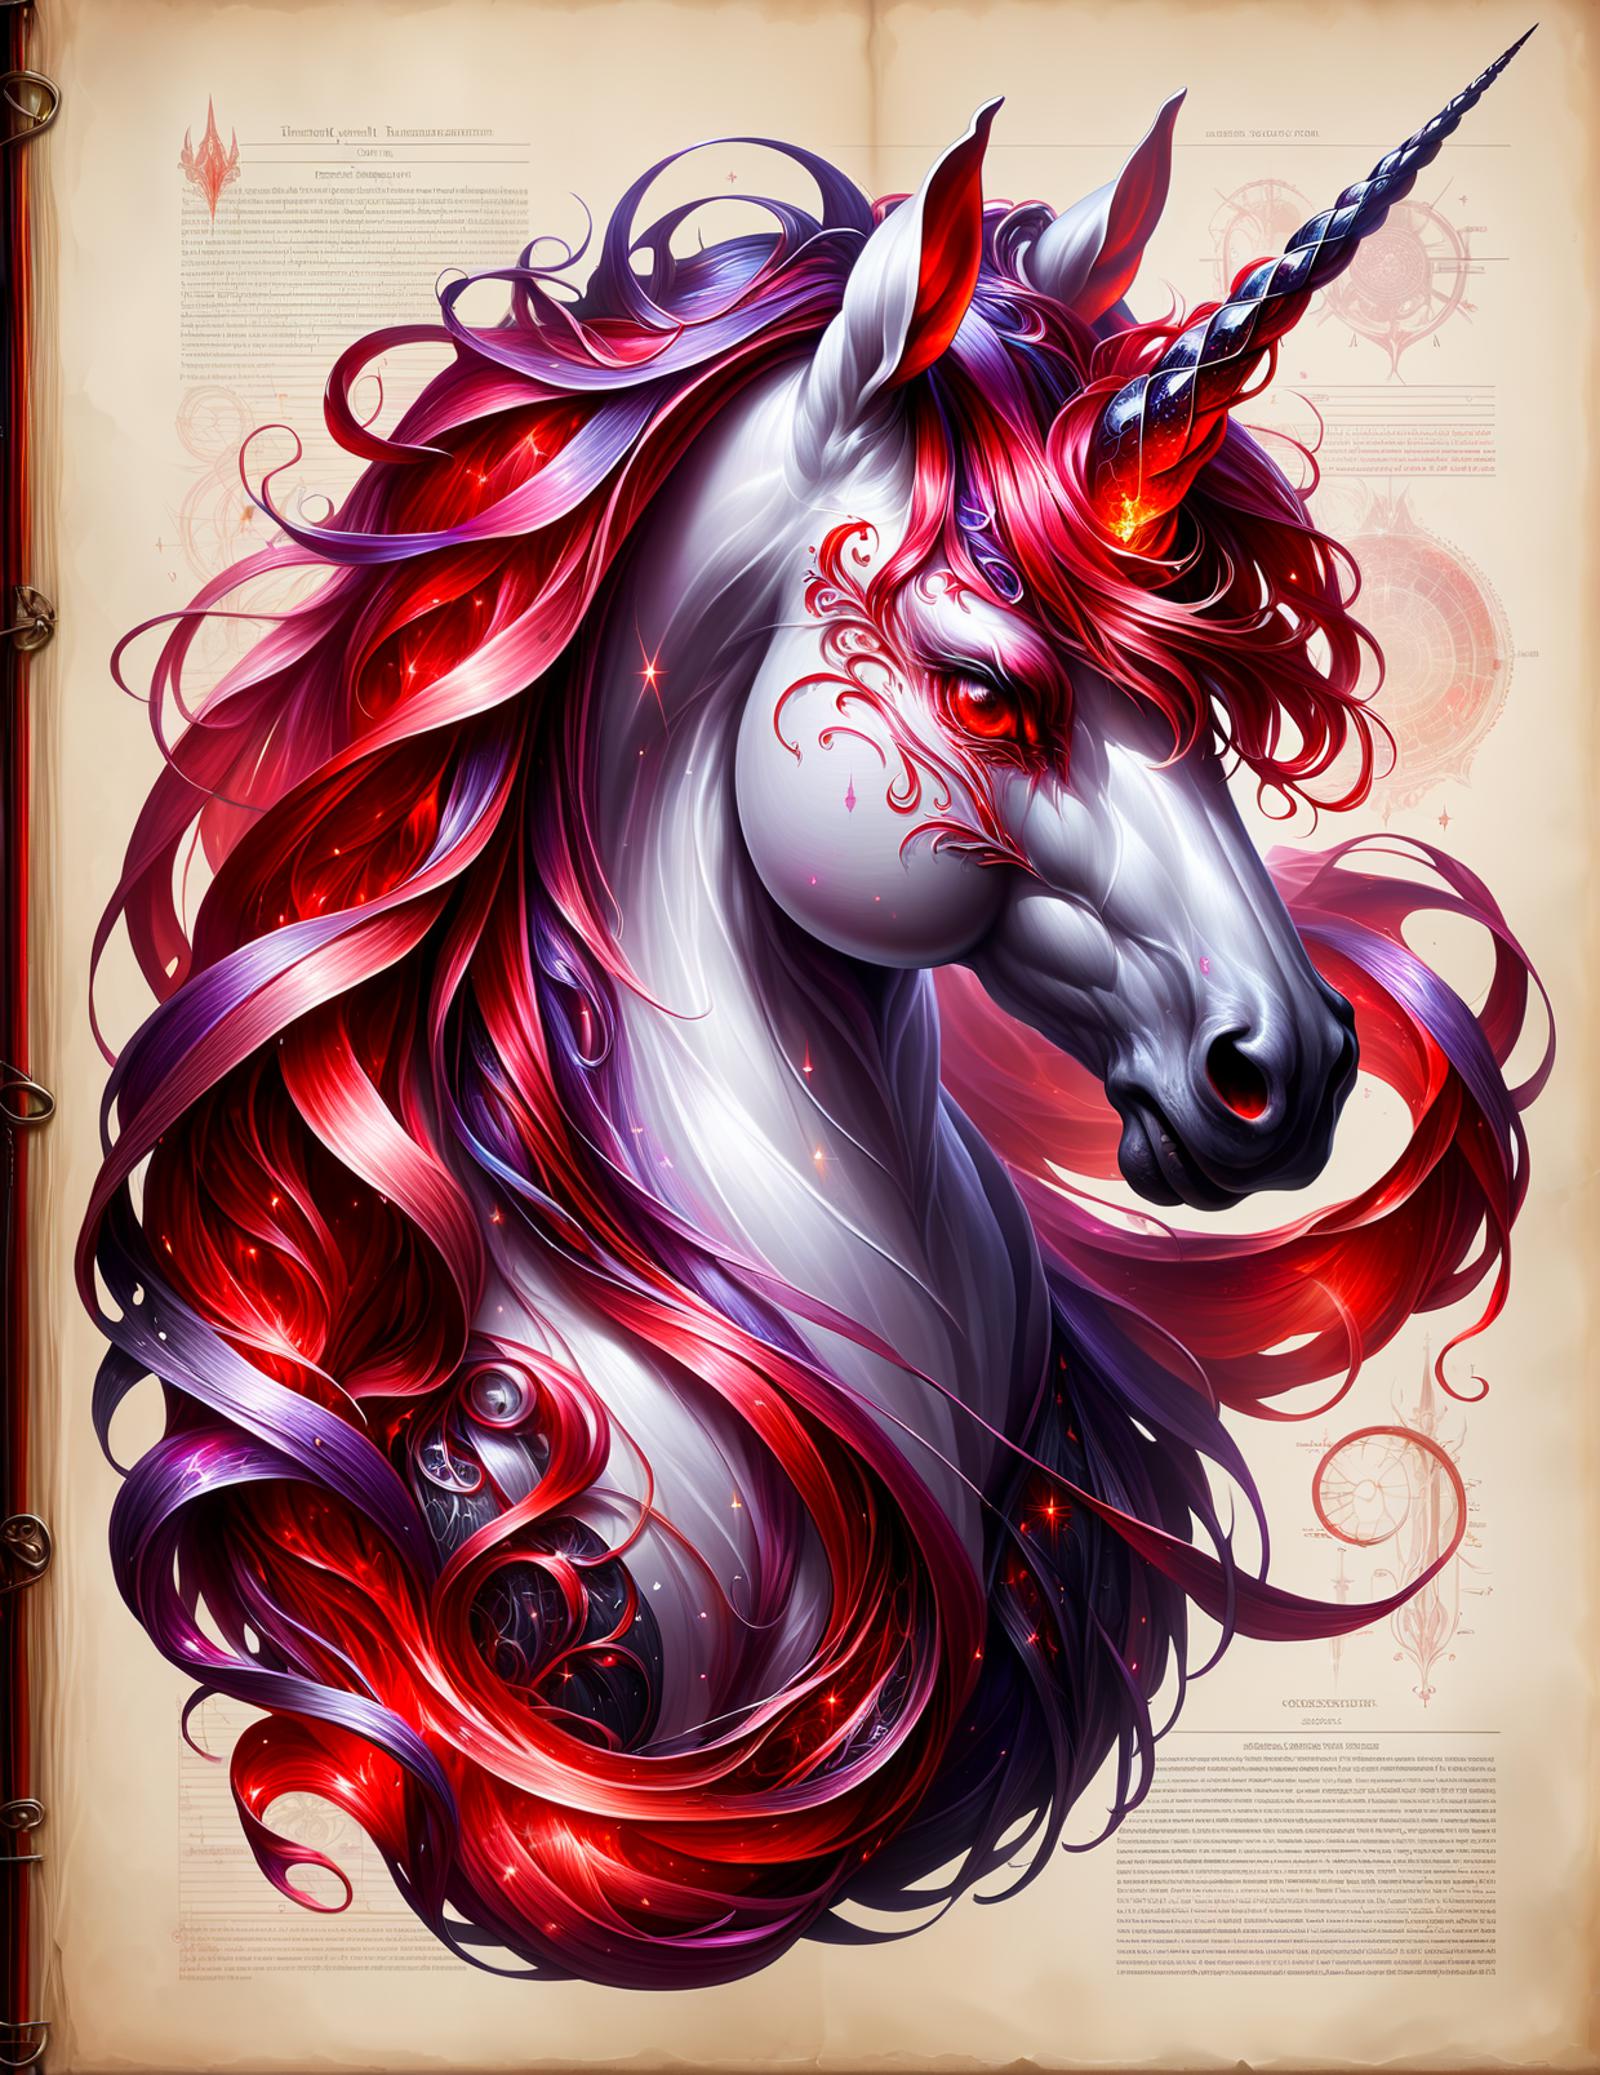 Artistic Illustration of a Pegasus with a Purple and Red Mane, Red Eyes, and White Body.